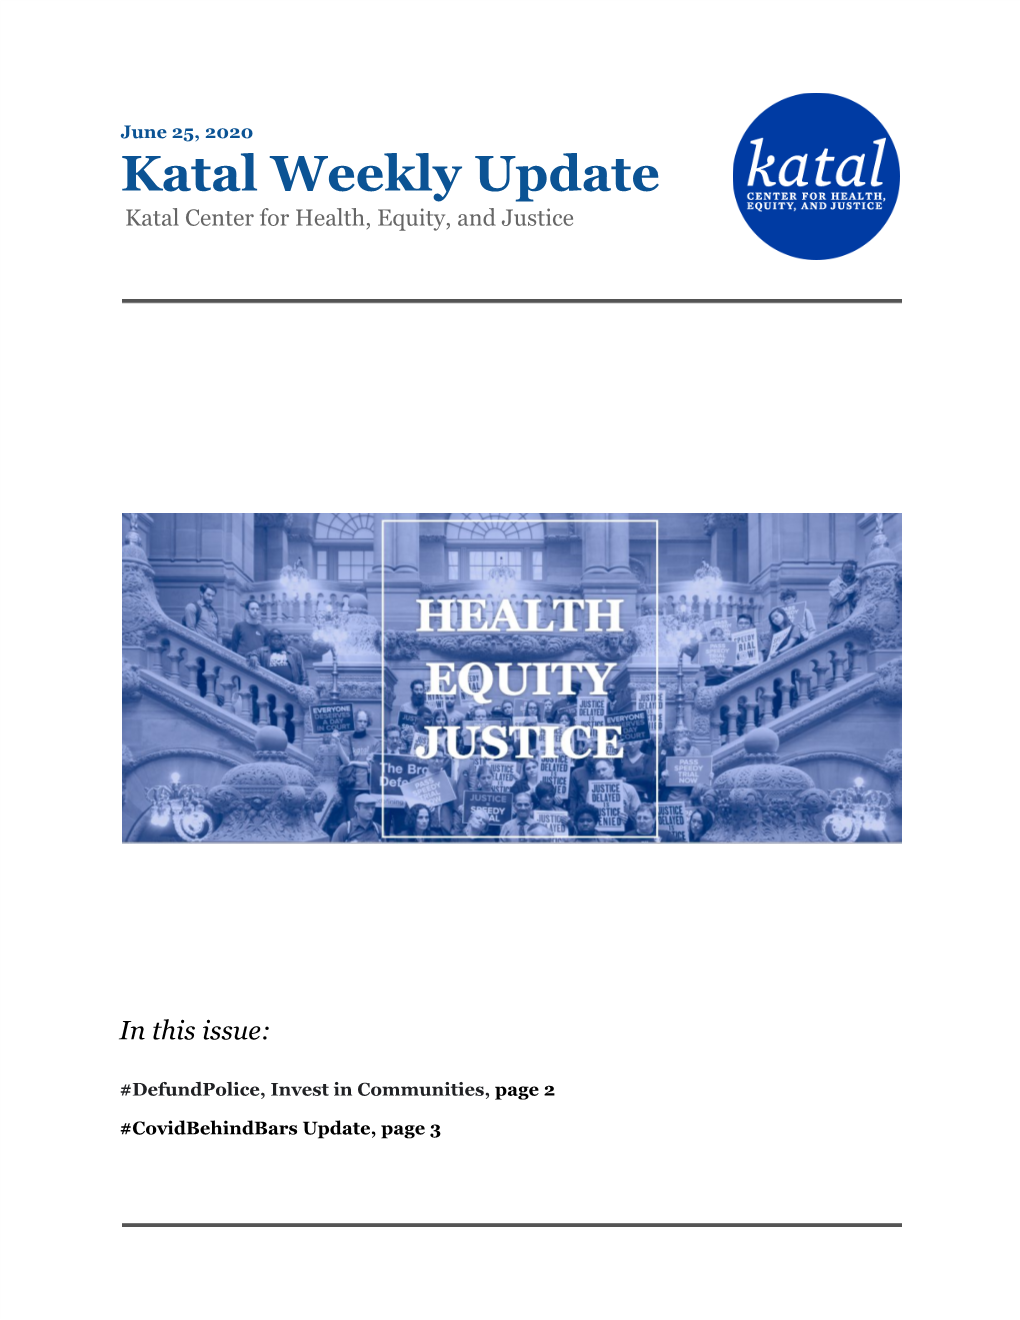 Katal Weekly Update Katal Center for Health, Equity, and Justice